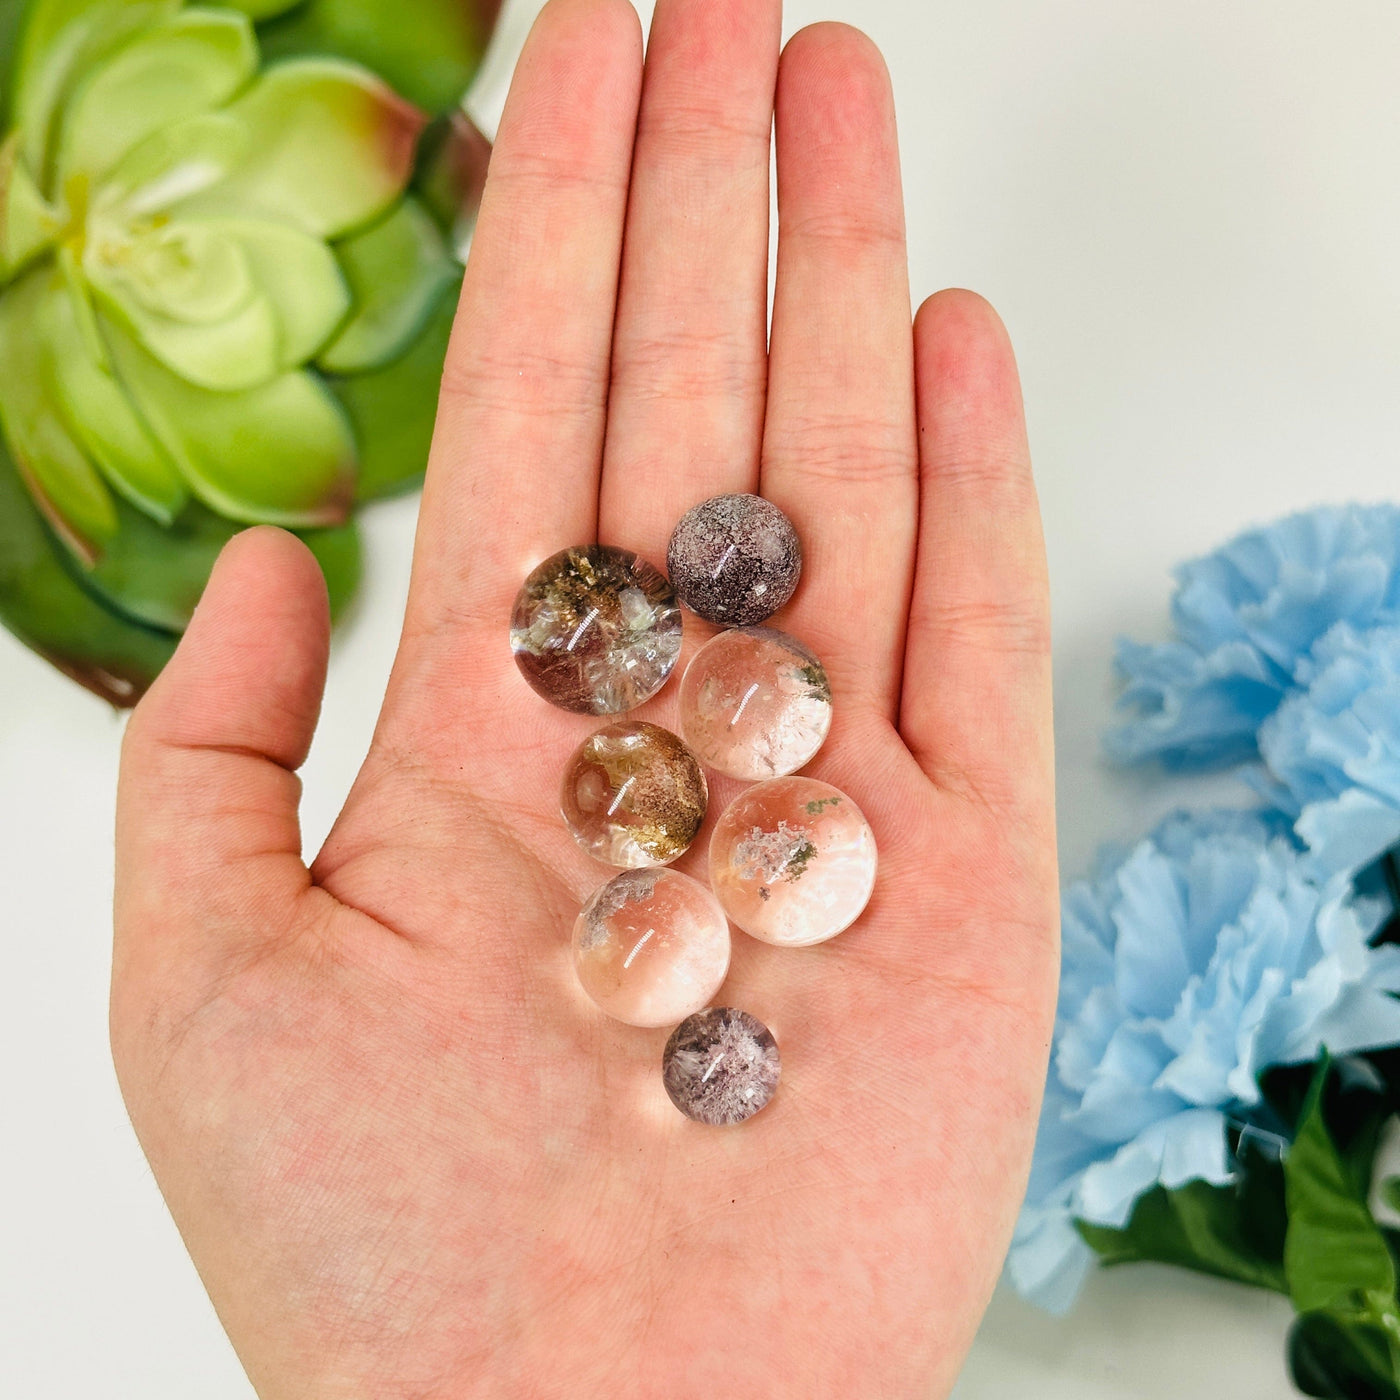 hand holding up lodalite spheres with decorations in the background